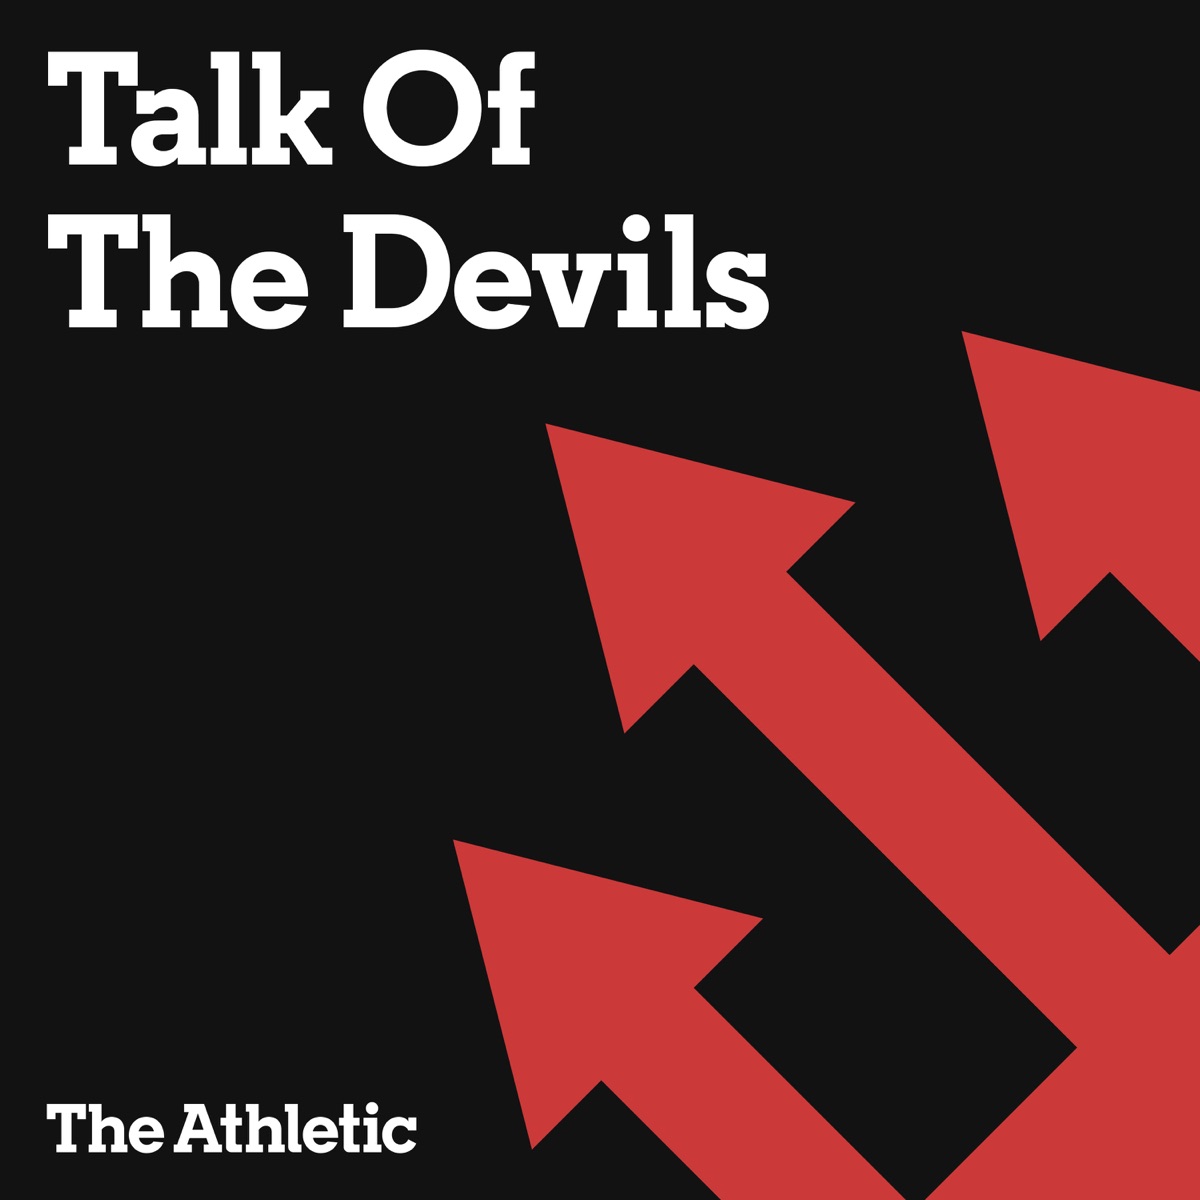 Speak of the Devils Podcast Sitdown Series: Offensive tackle Isaia Glass